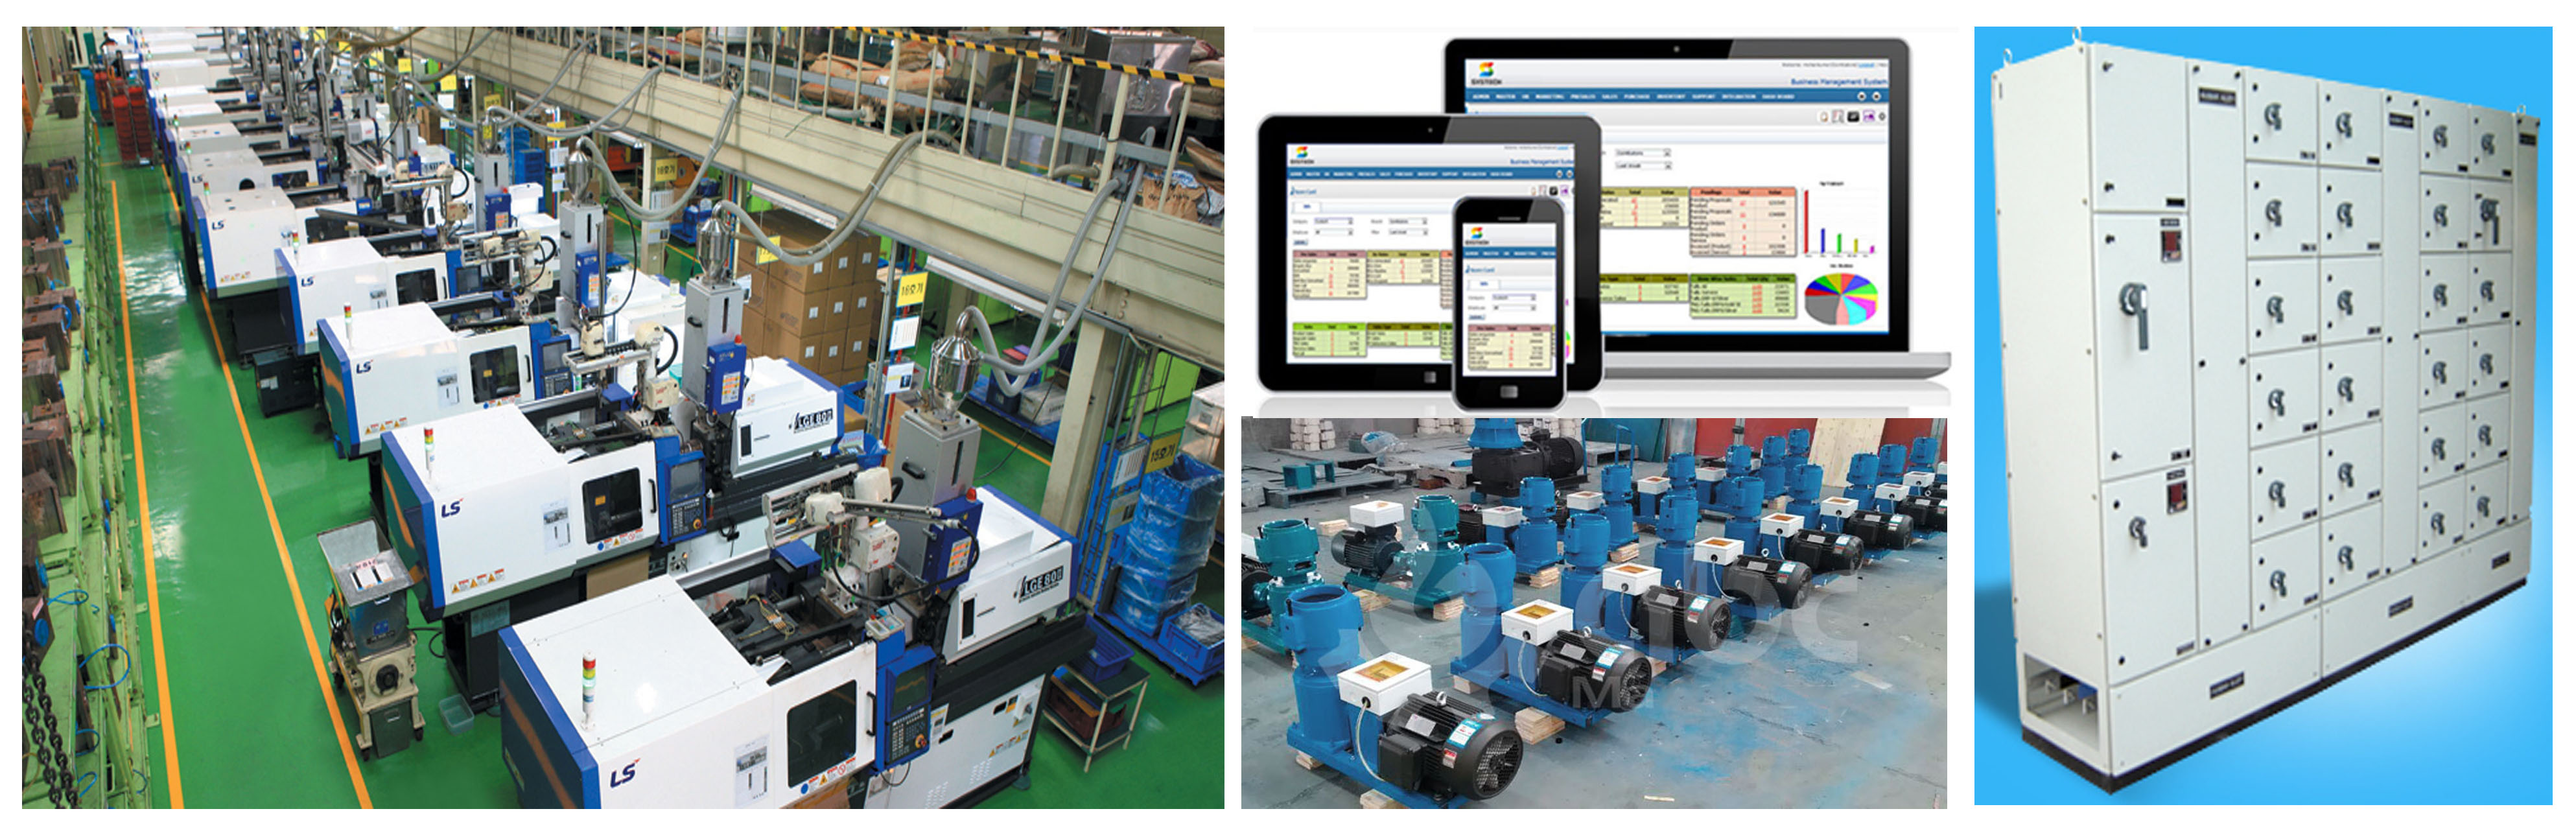 AUTOMATE YOUR MANUFACTURING BUSINESS LIKE NEVER BEFORE